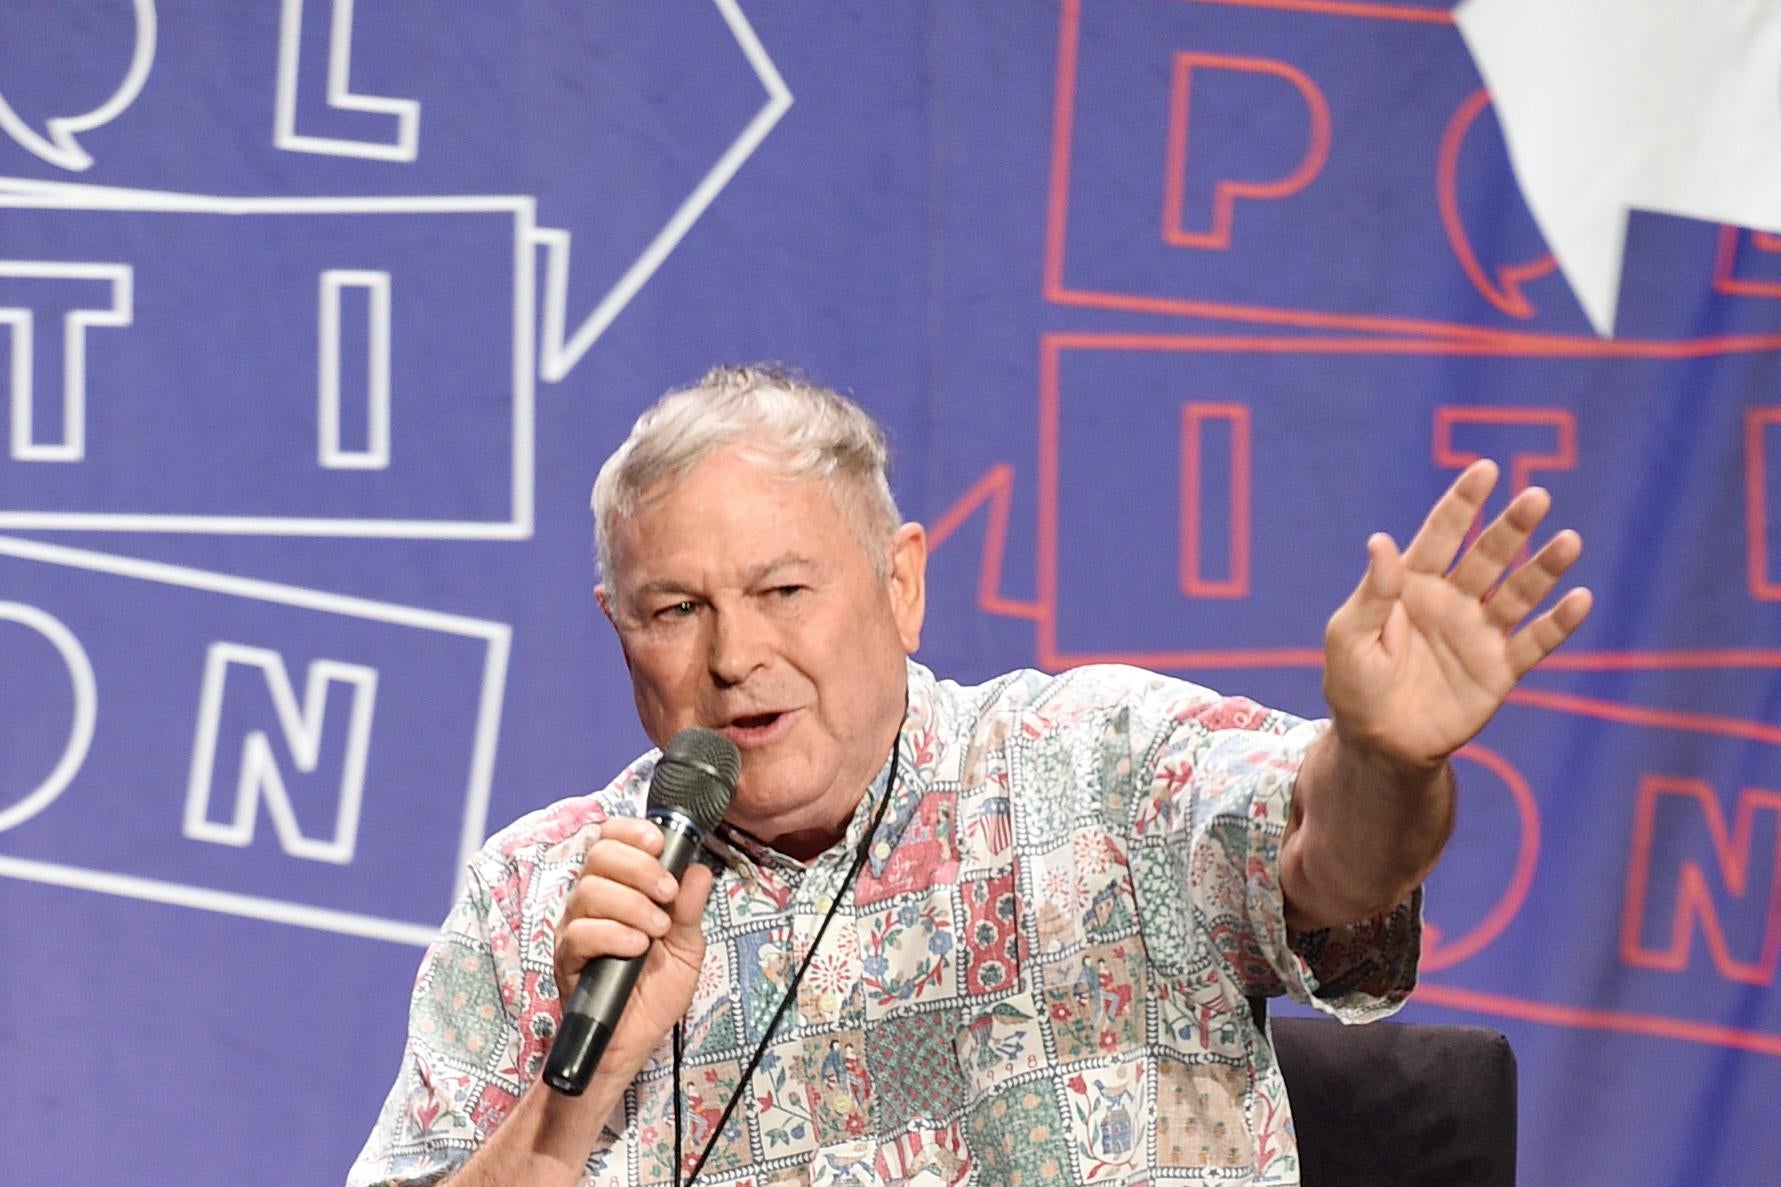 PASADENA, CA - JULY 30:  Dana Rohrabacher at the 'From Russia With Trump' panel during Politicon at Pasadena Convention Center on July 30, 2017 in Pasadena, California.  (Photo by Joshua Blanchard/Getty Images  for Politicon)